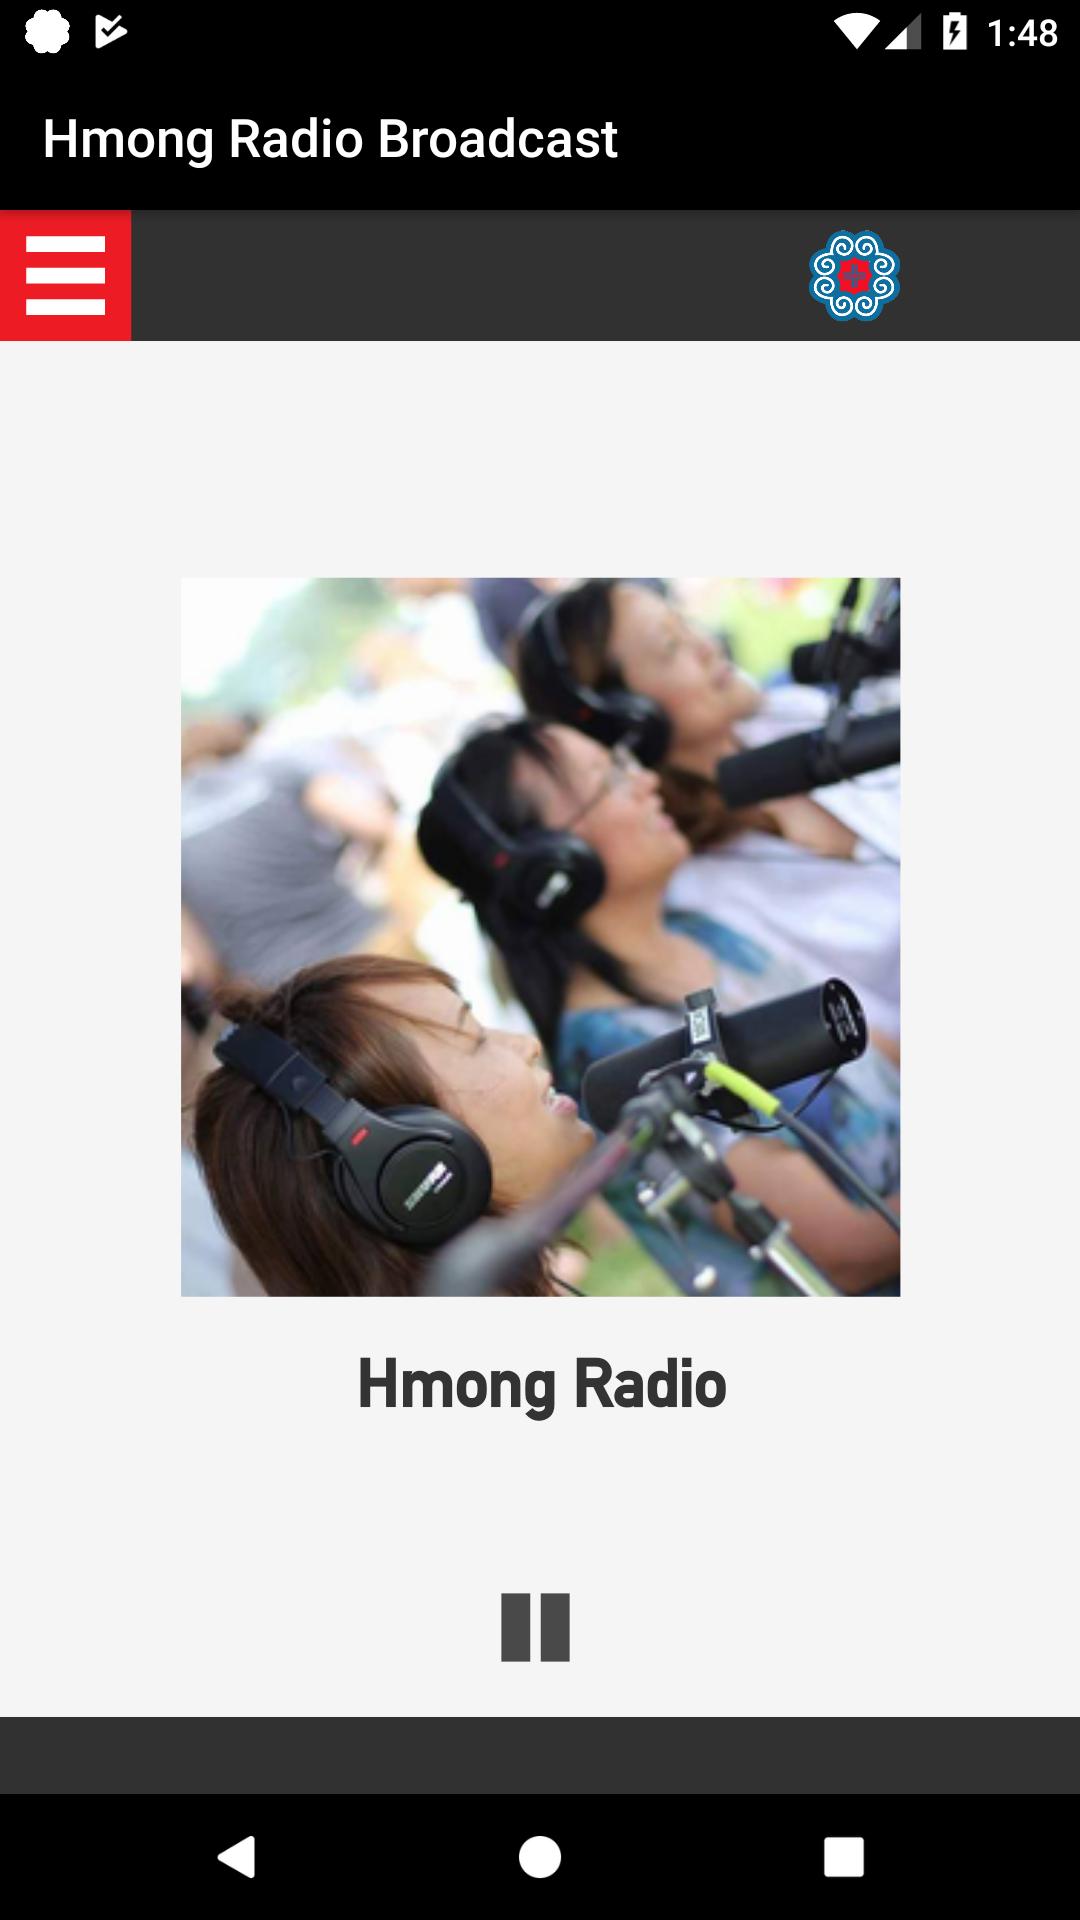 Hmong Radio Broadcast for Android - APK Download